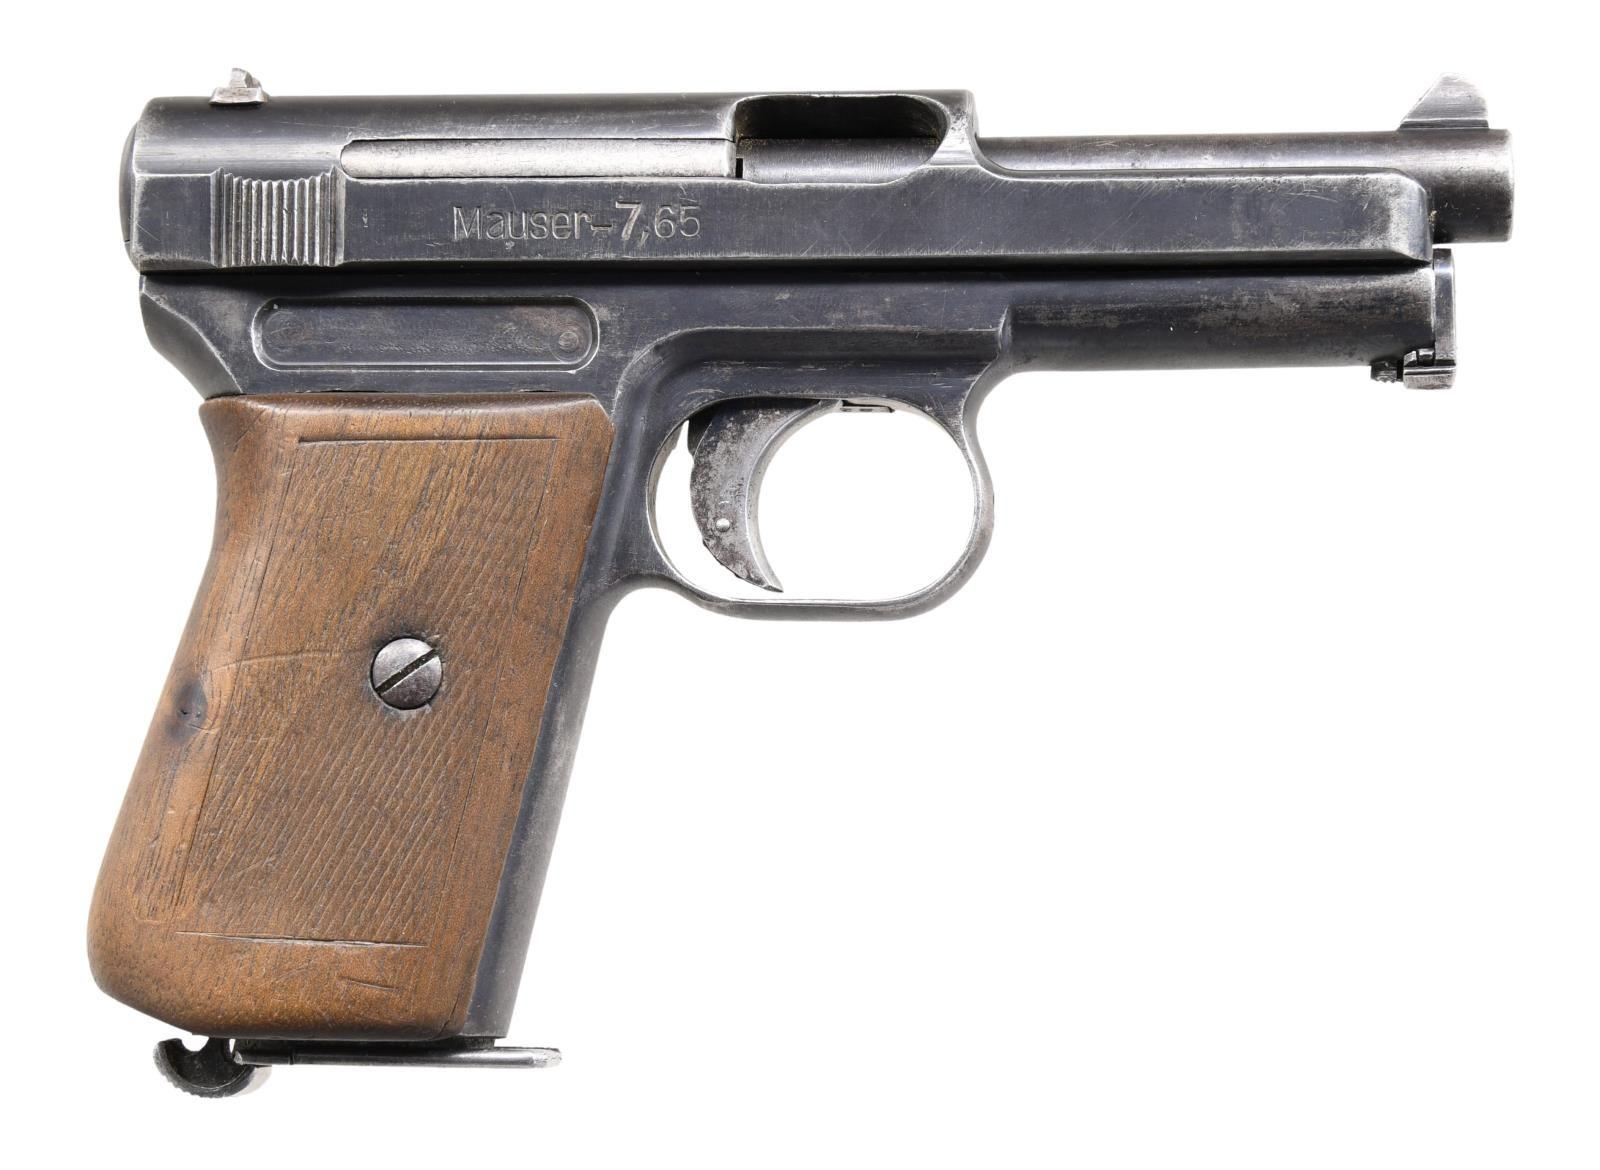 MAUSER MODEL 1914 SEMI-AUTOMATIC PISTOL WITH